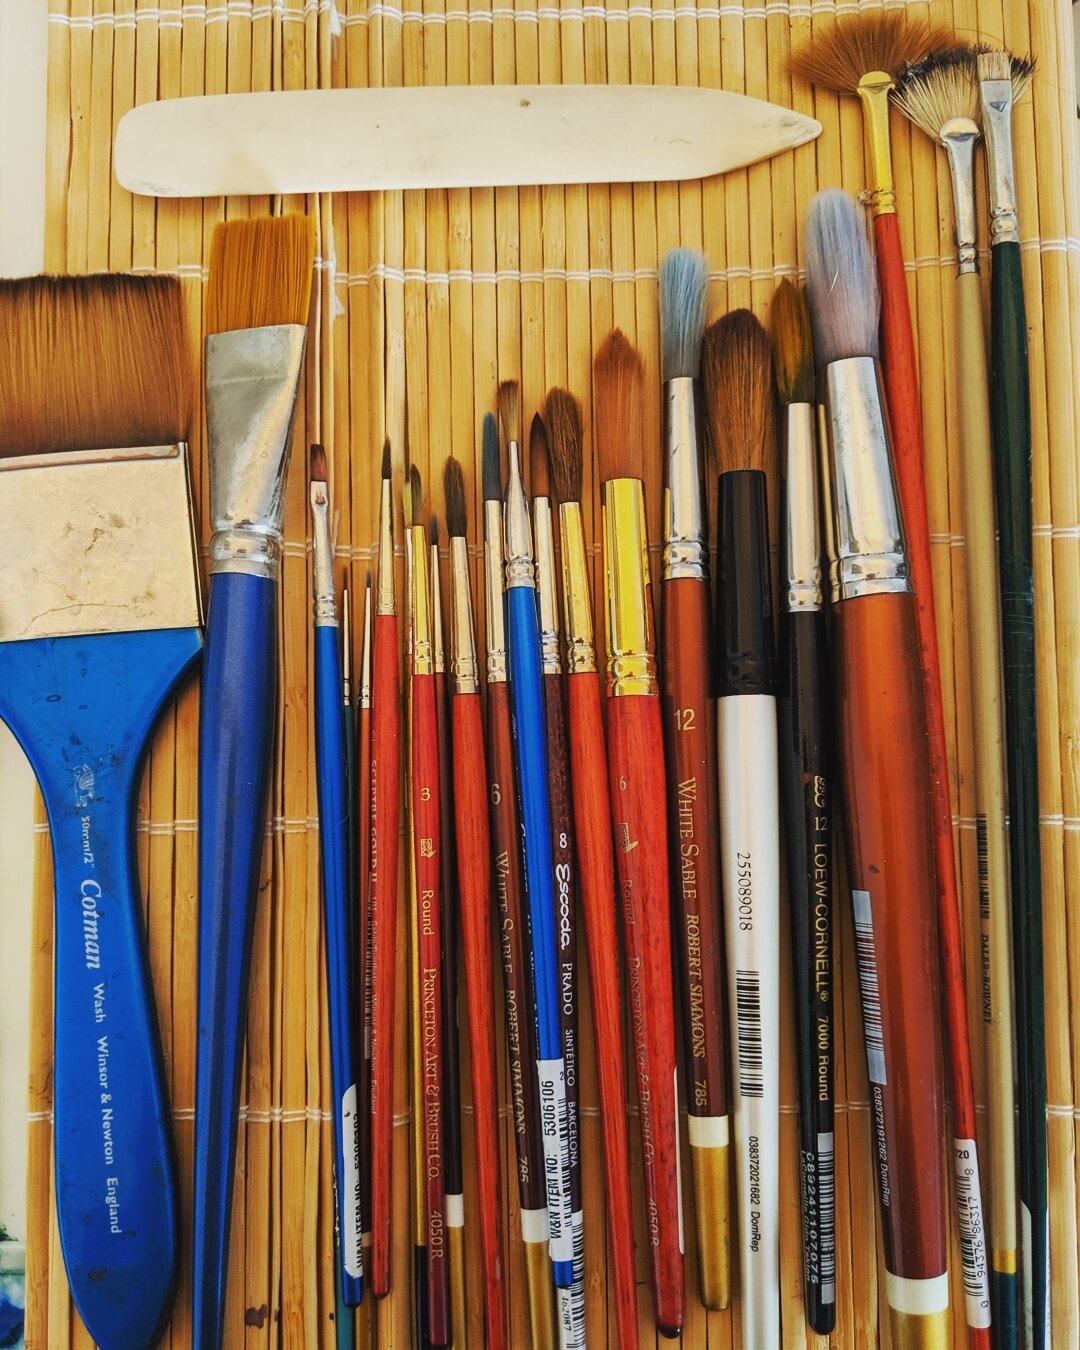 old friends, here to play.

#robertsimmonsbrushes #cotmanbrushes